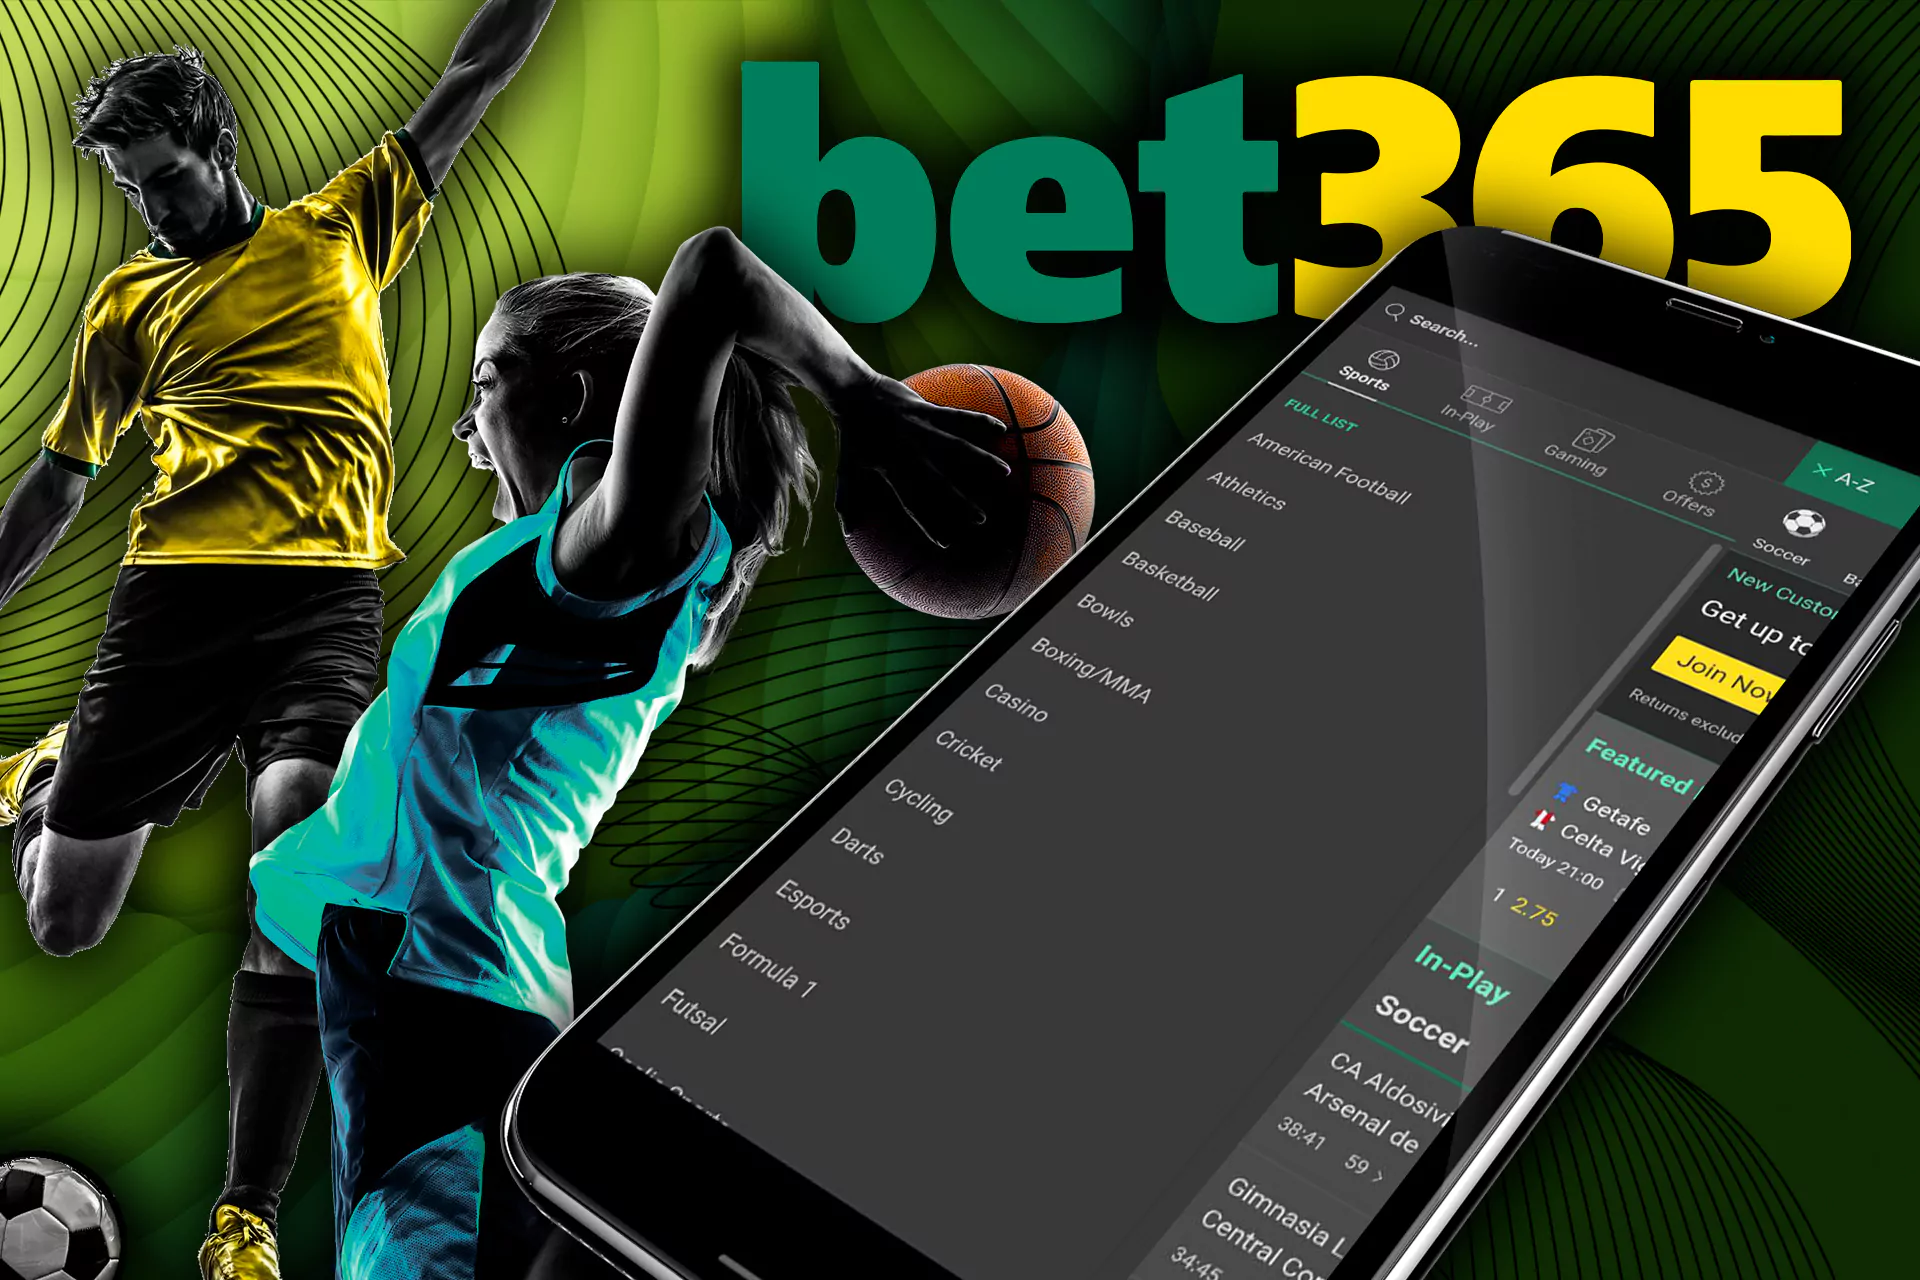 List of sports available in the Bet365 app.